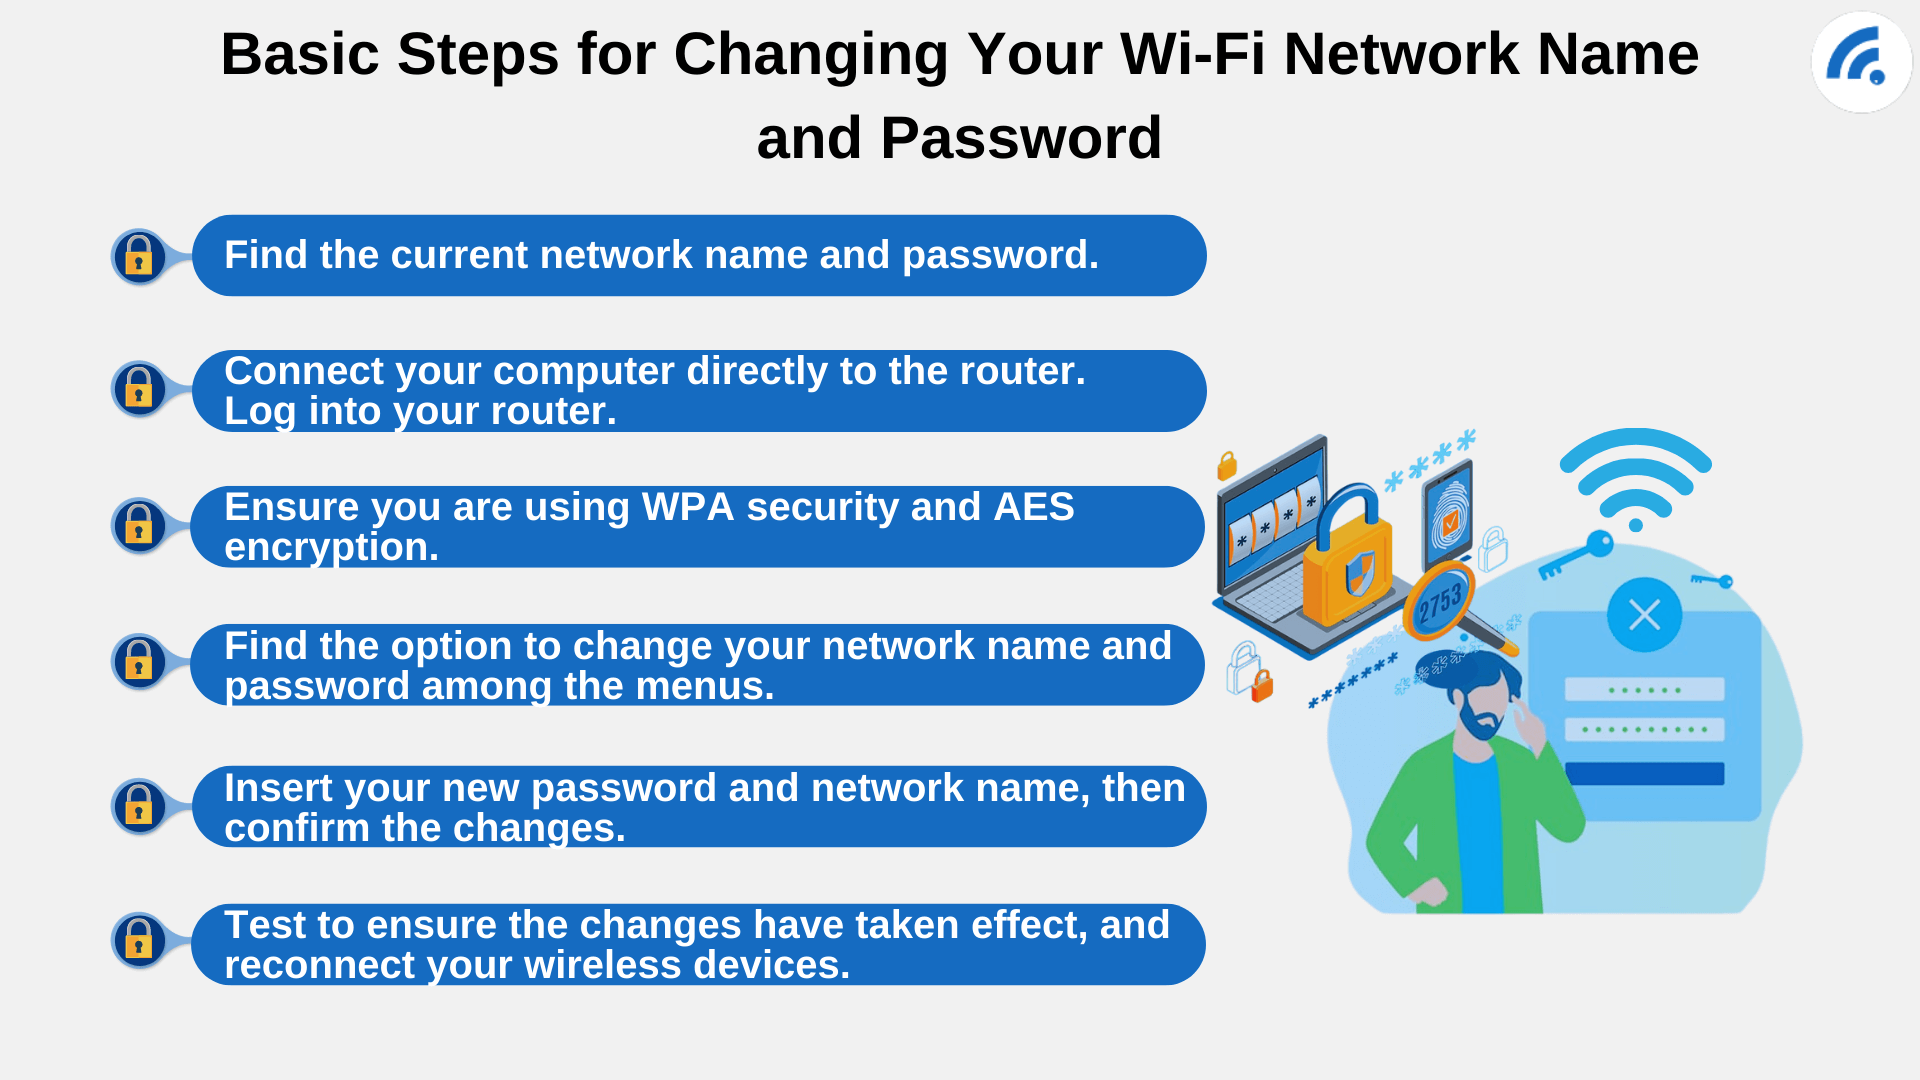 How to Change Your Wi-Fi Network Name and Password